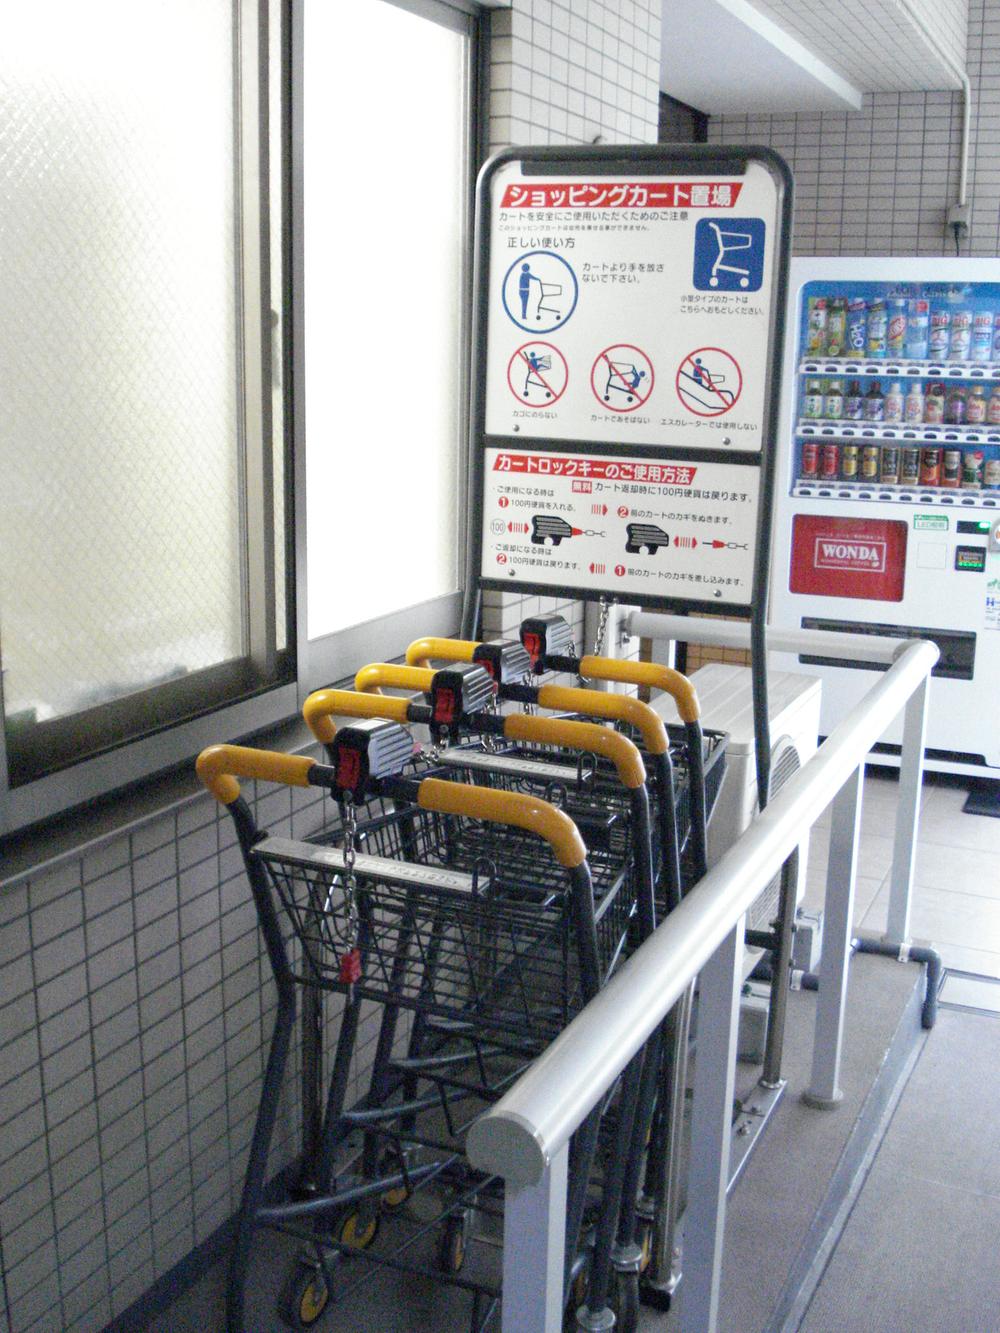 Other common areas.  ■ Convenient shopping cart is available in the apartment.